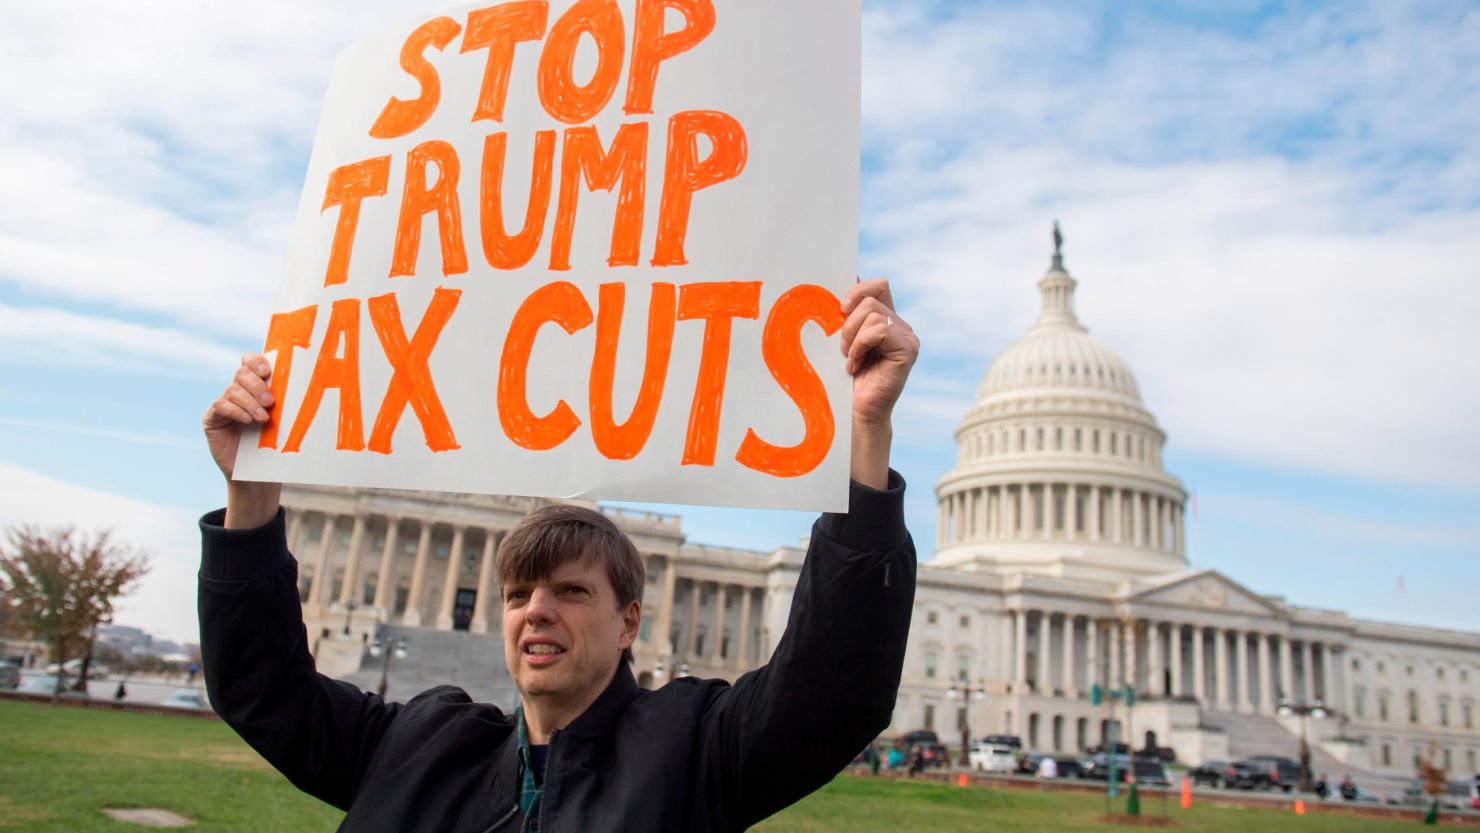 Demonstrators protest against the Republican tax reform plan during a rally organized by Our Revolution and Americans for Tax Fairness Action Fund on Capitol Hill in Washington, DC, November 15, 2017.